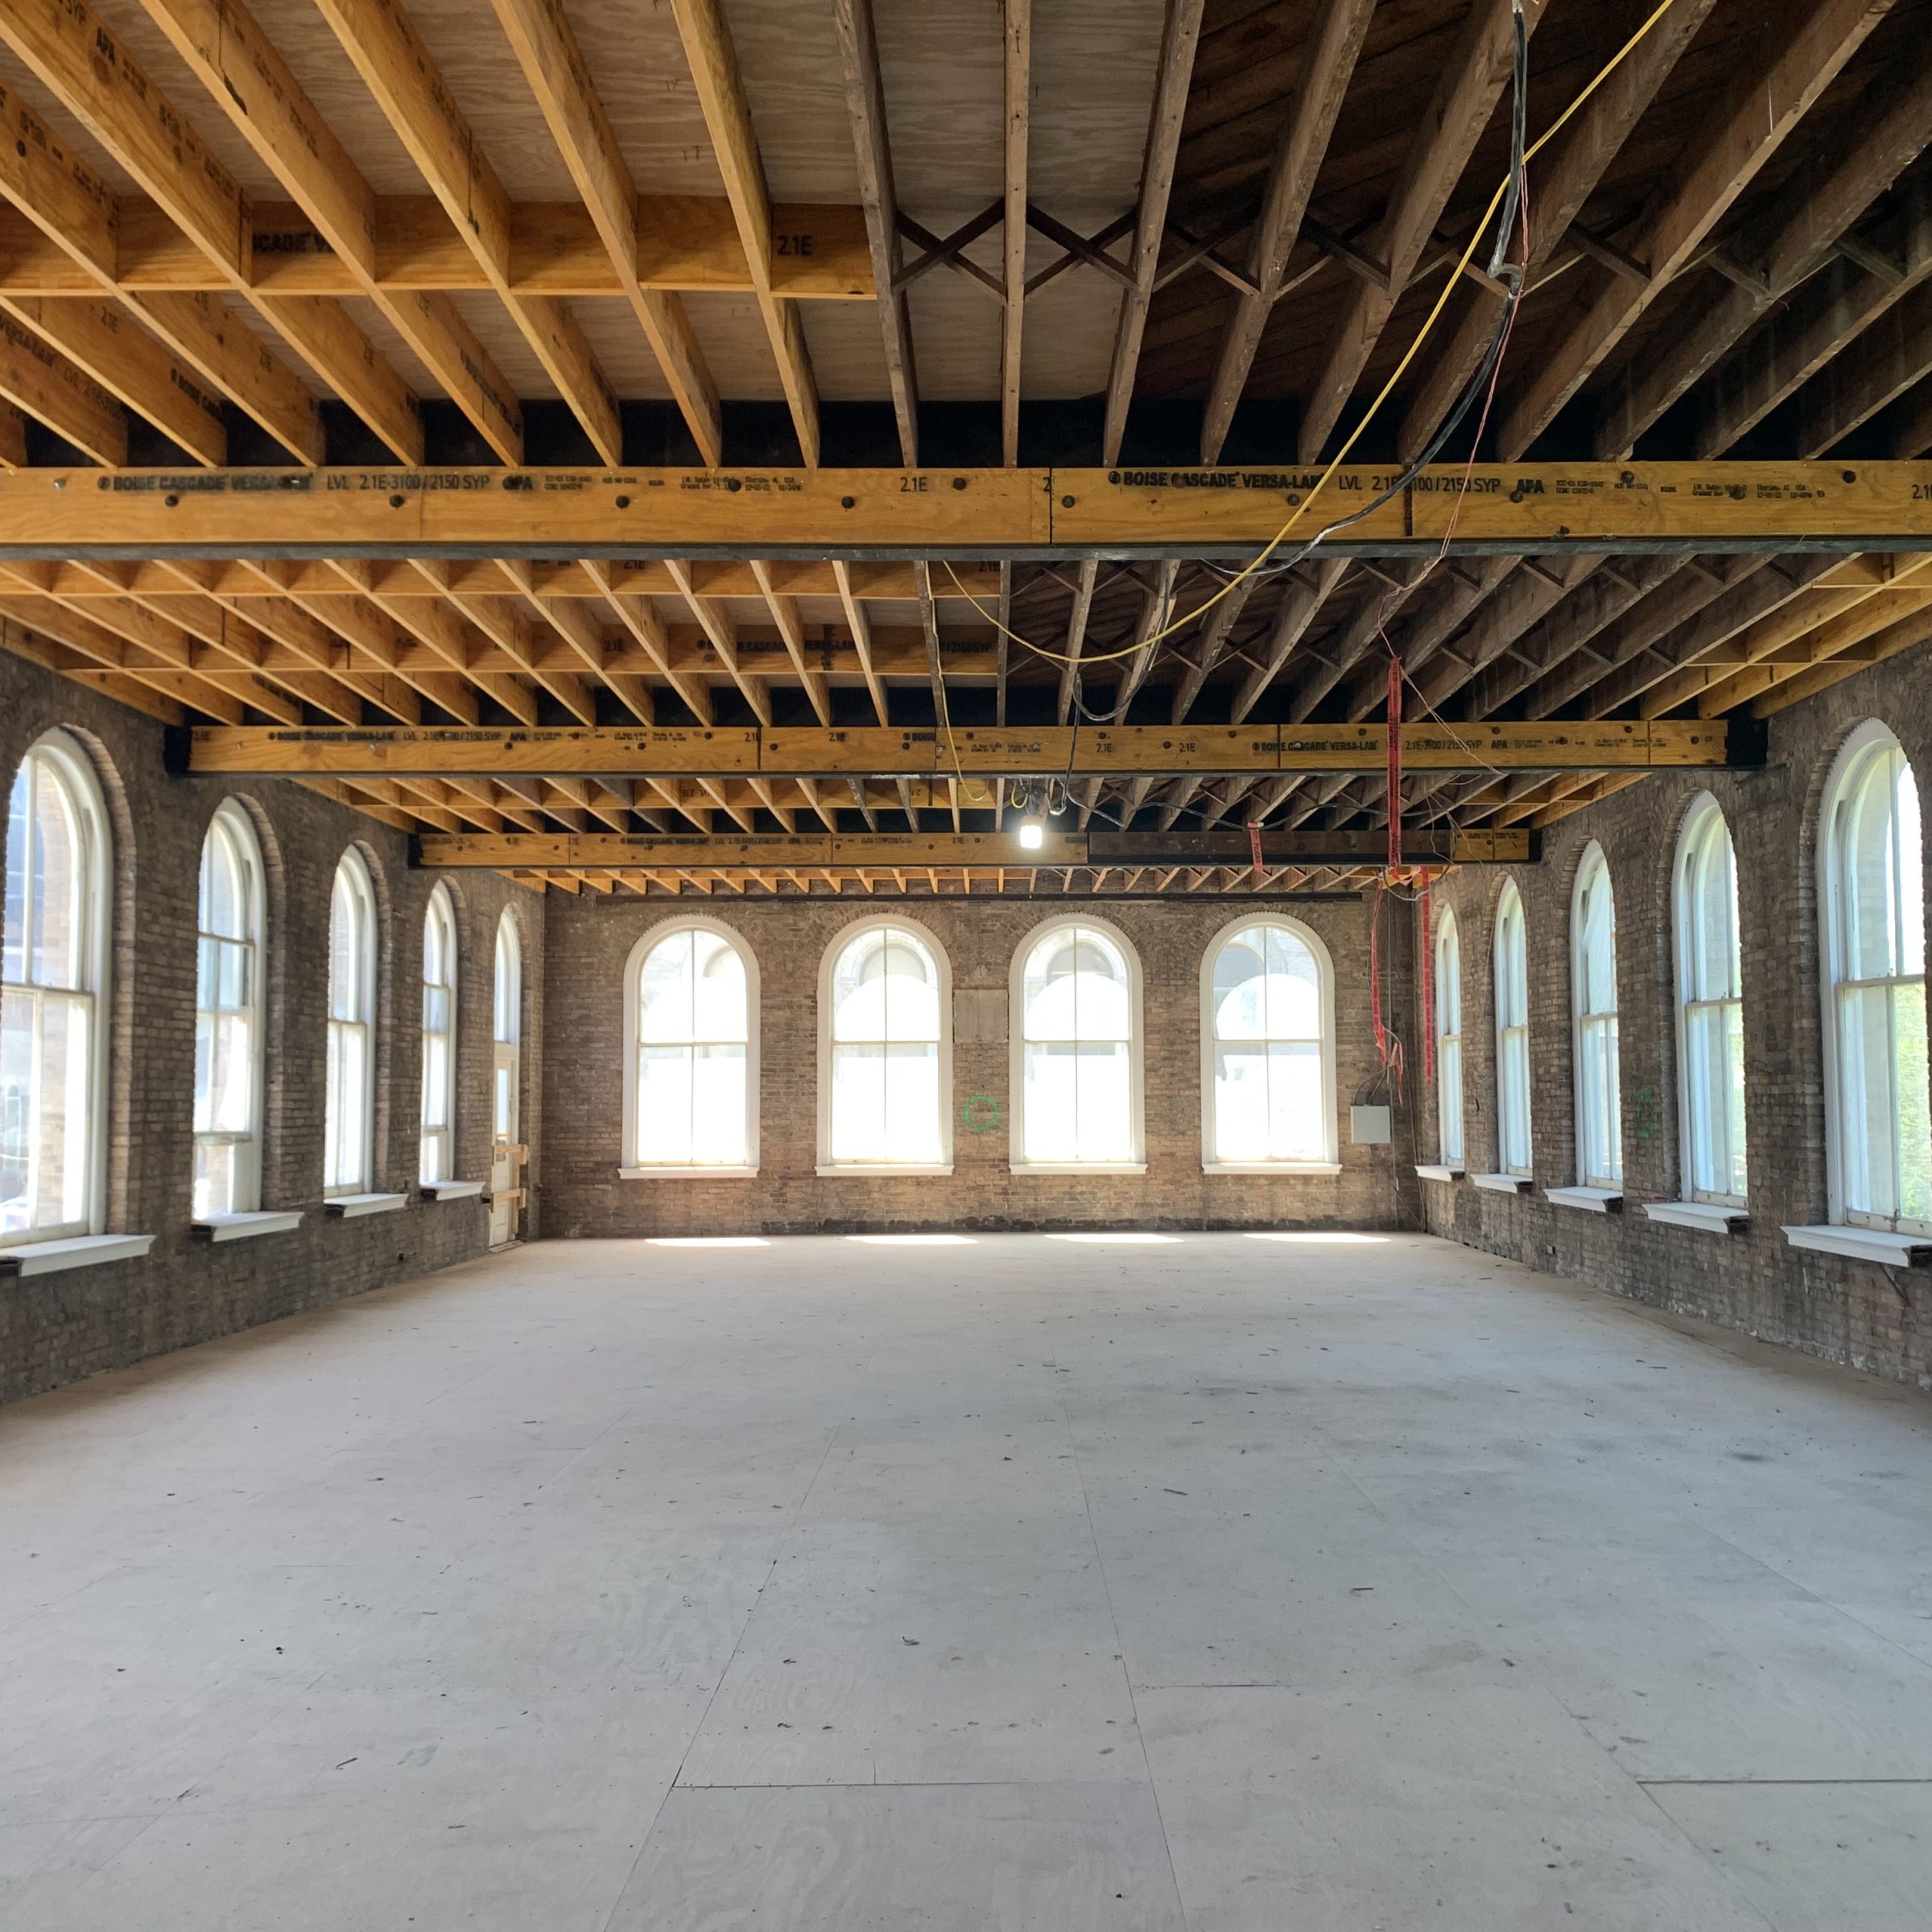 Interior view of a historic renovation inside a large hall with tall arched windows on lining the left, right, and back walls with exposed ceiling-floor beams above and a new sub-floor below.